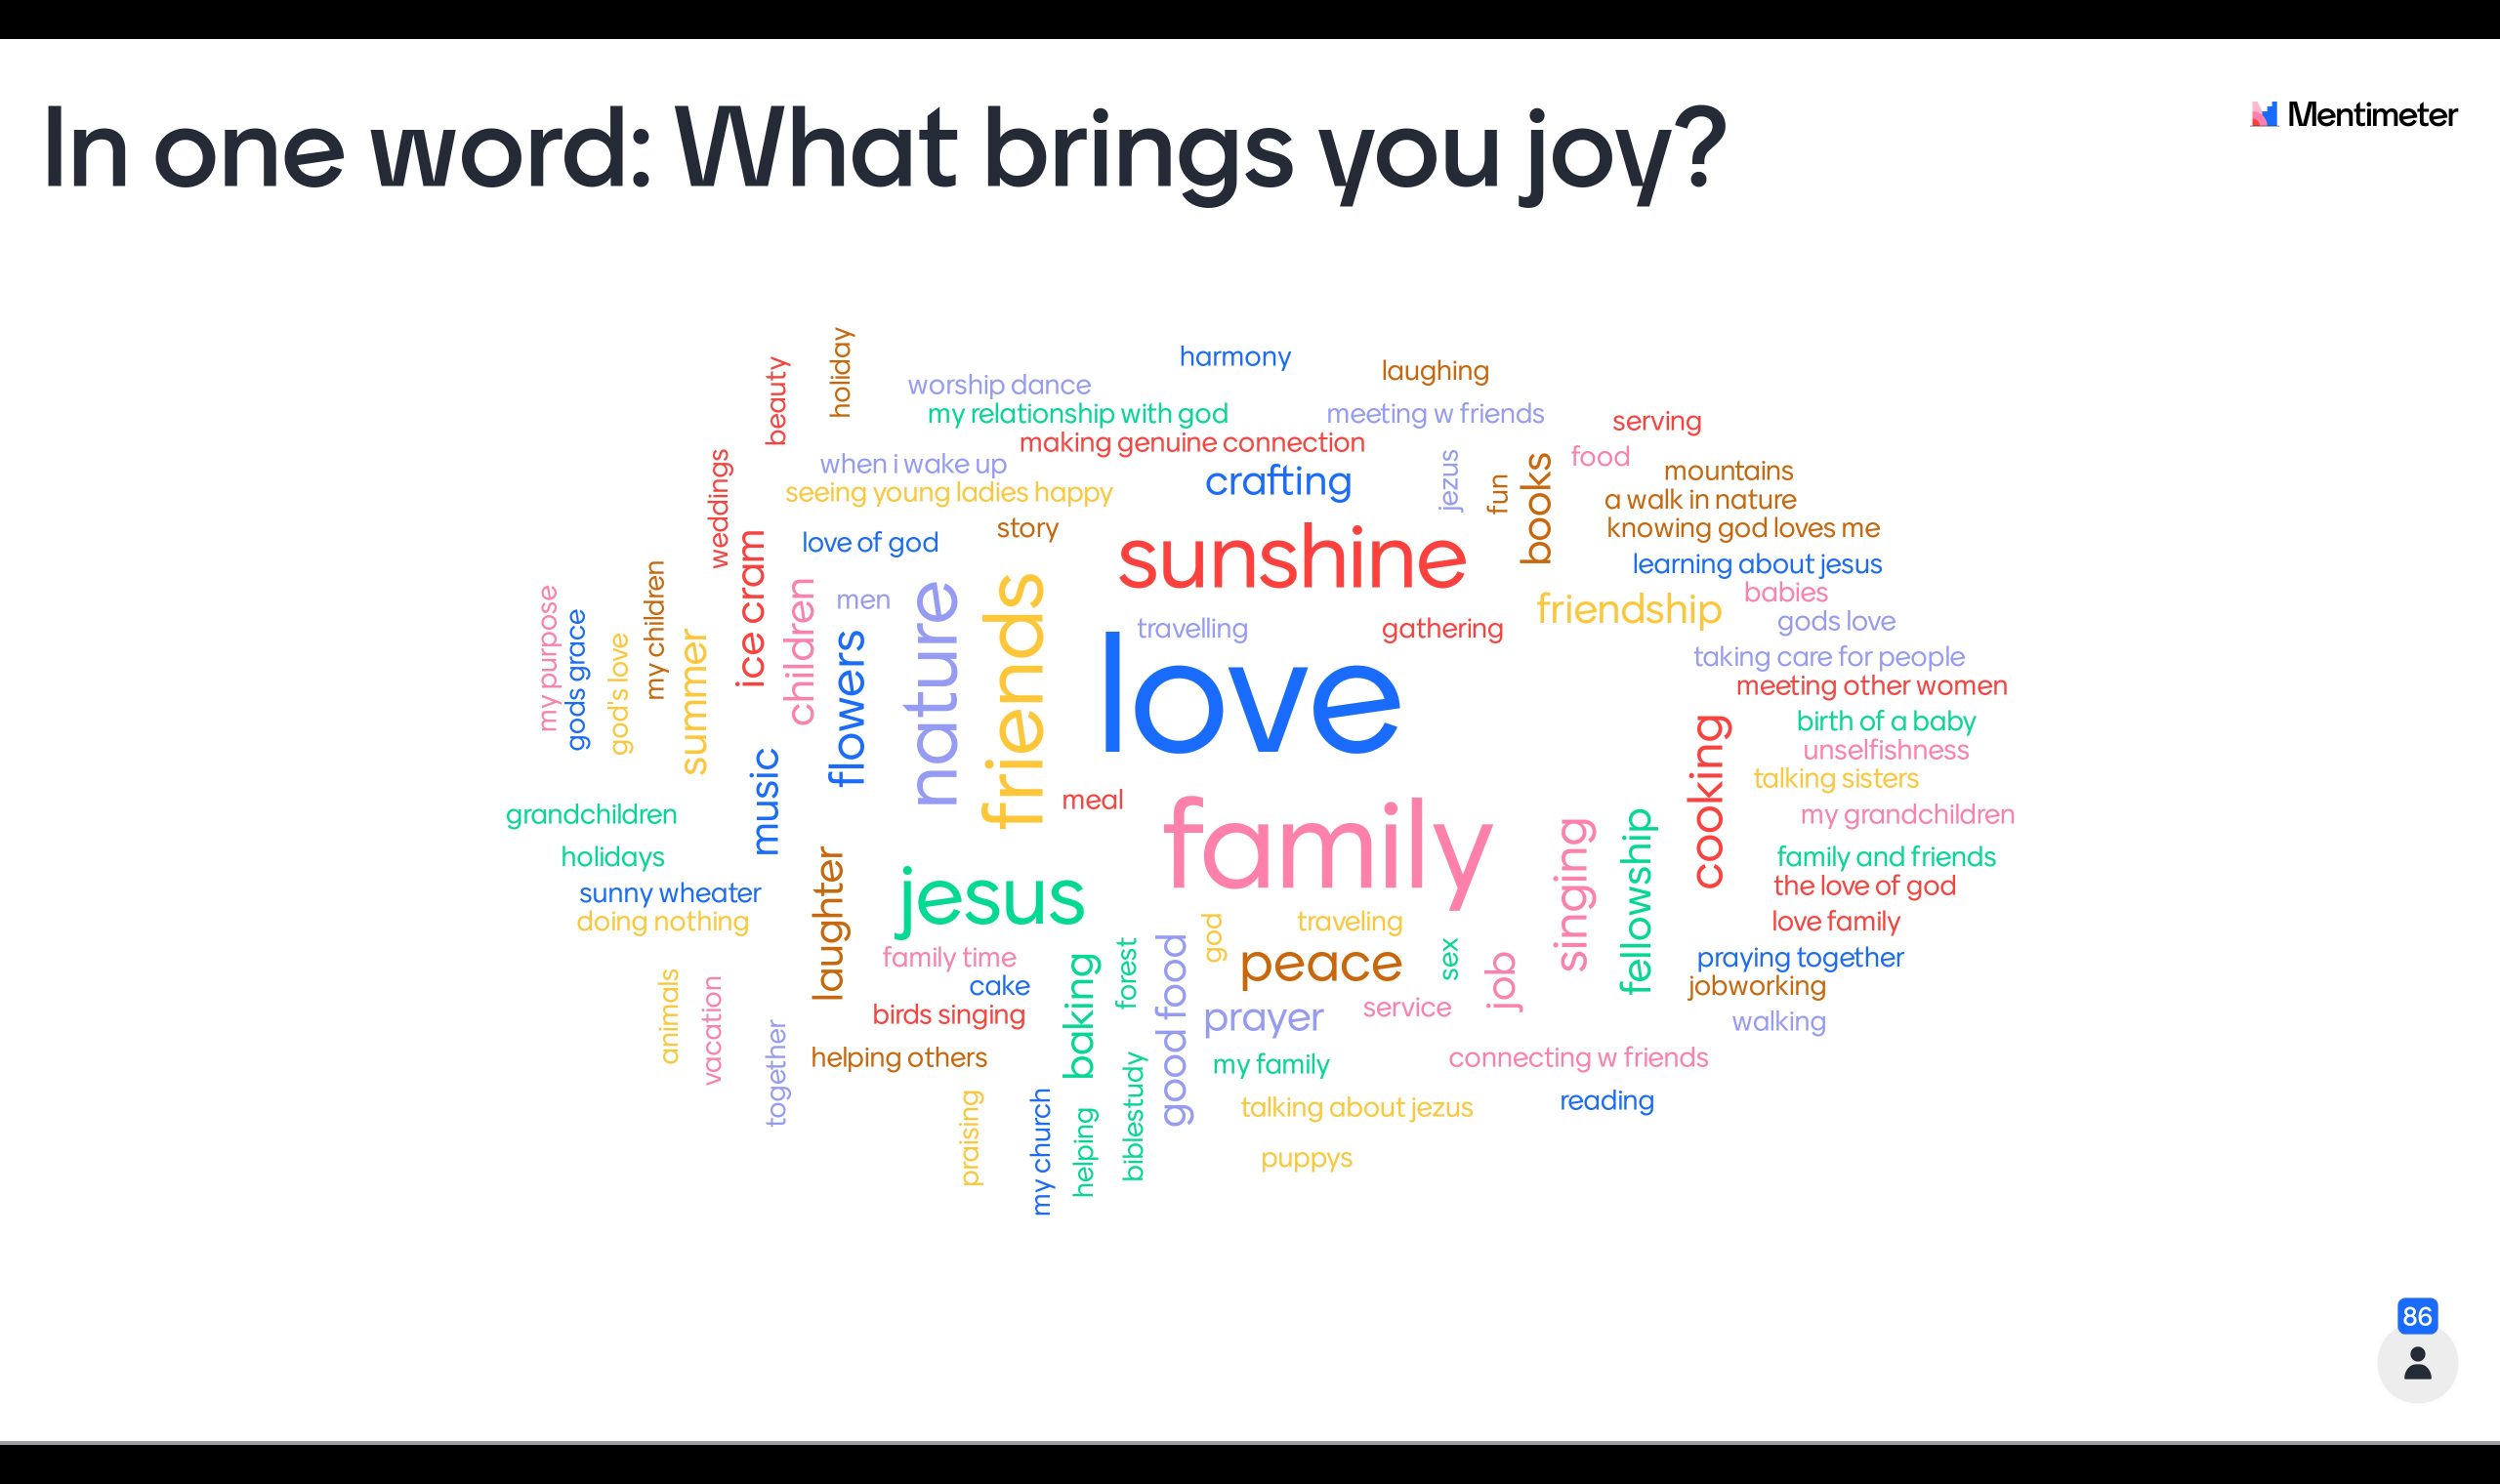 One-in-one word what brings you joy